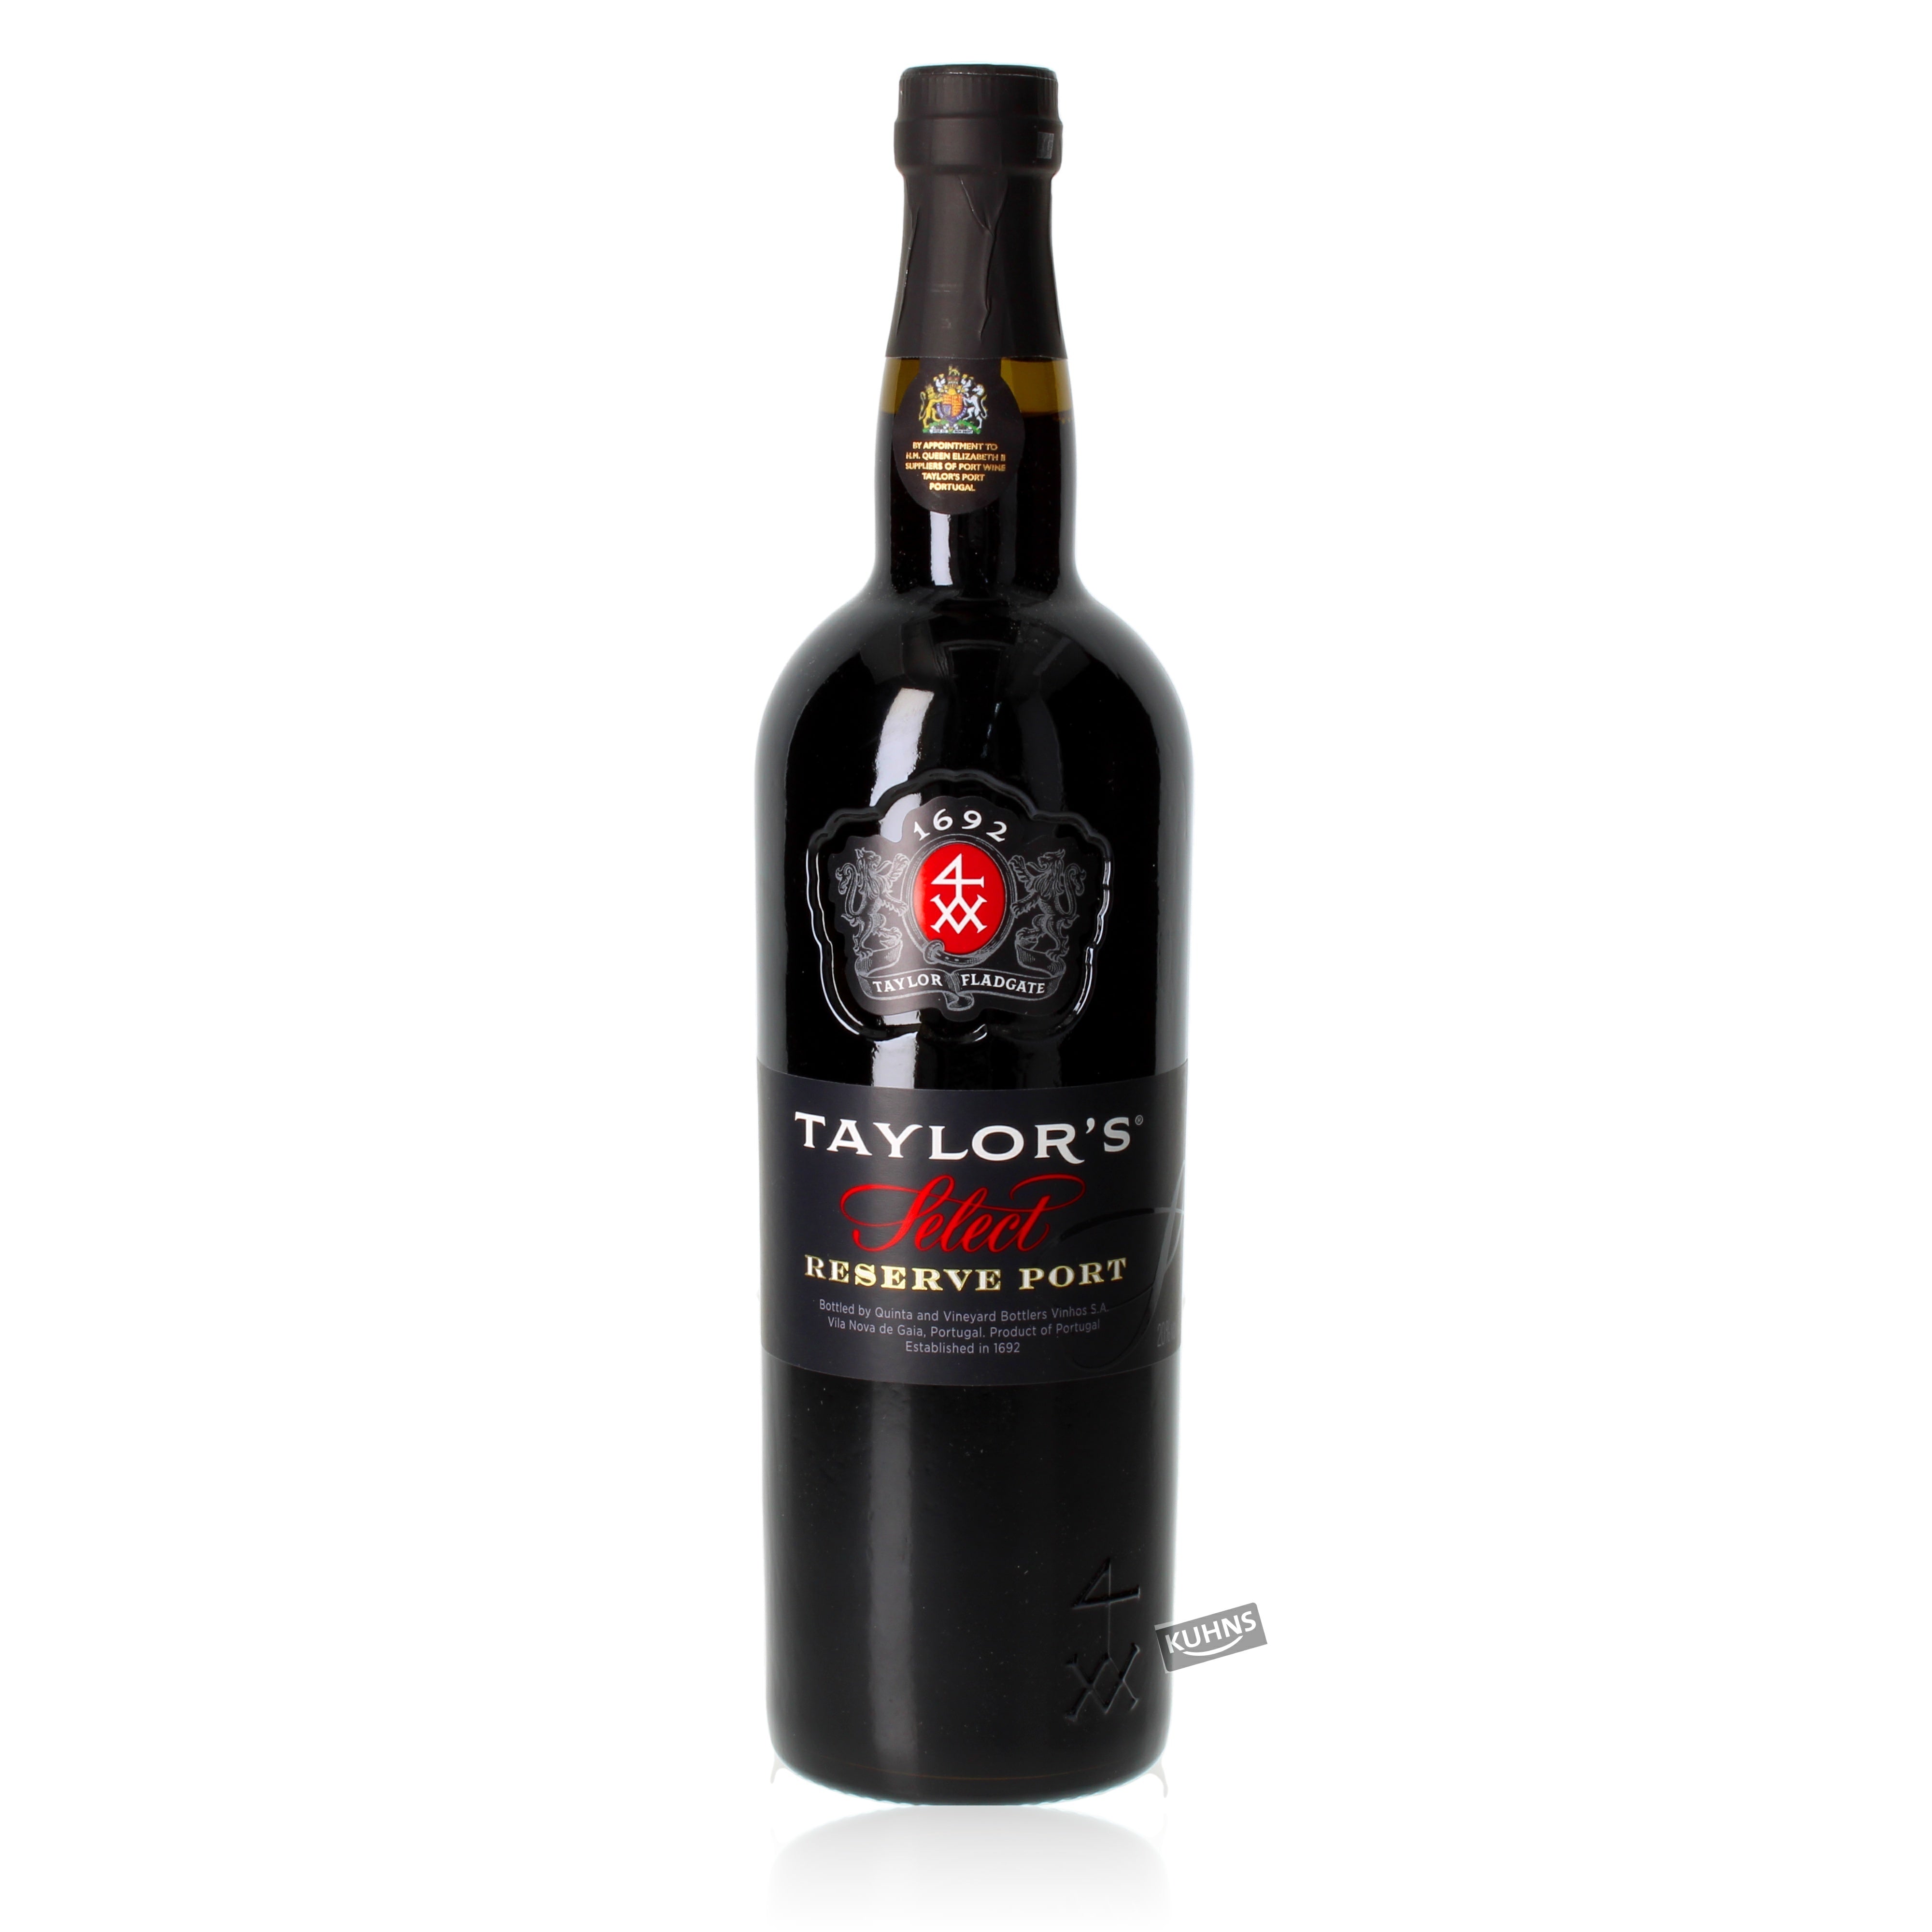 Taylor's Select Reserve Port 0.75l, alc. 20% by volume